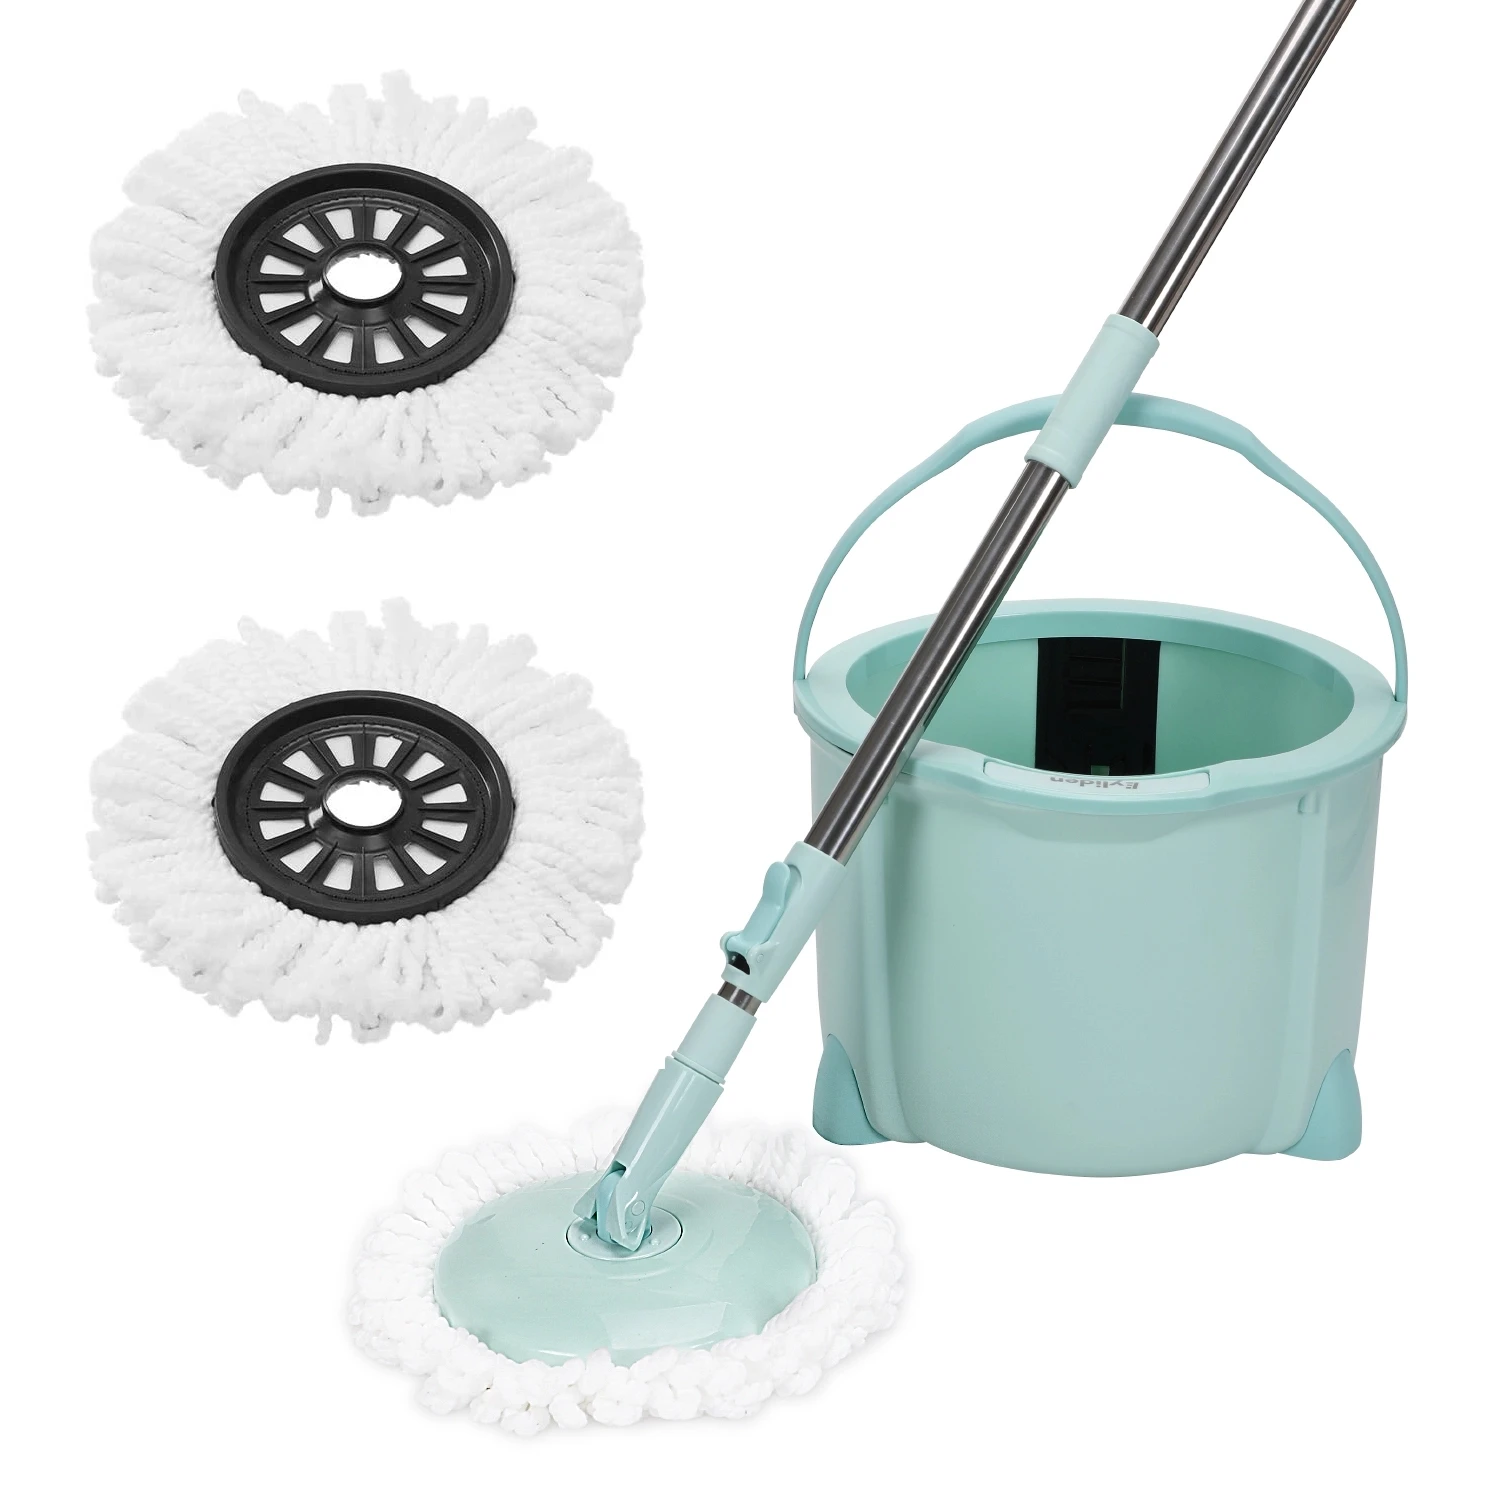 Eyliden Rotating Spinning Mop 360 Degree Microfiber with Bucket 2 Microfibre Heads and Adjustable Handle for Home Cleaning